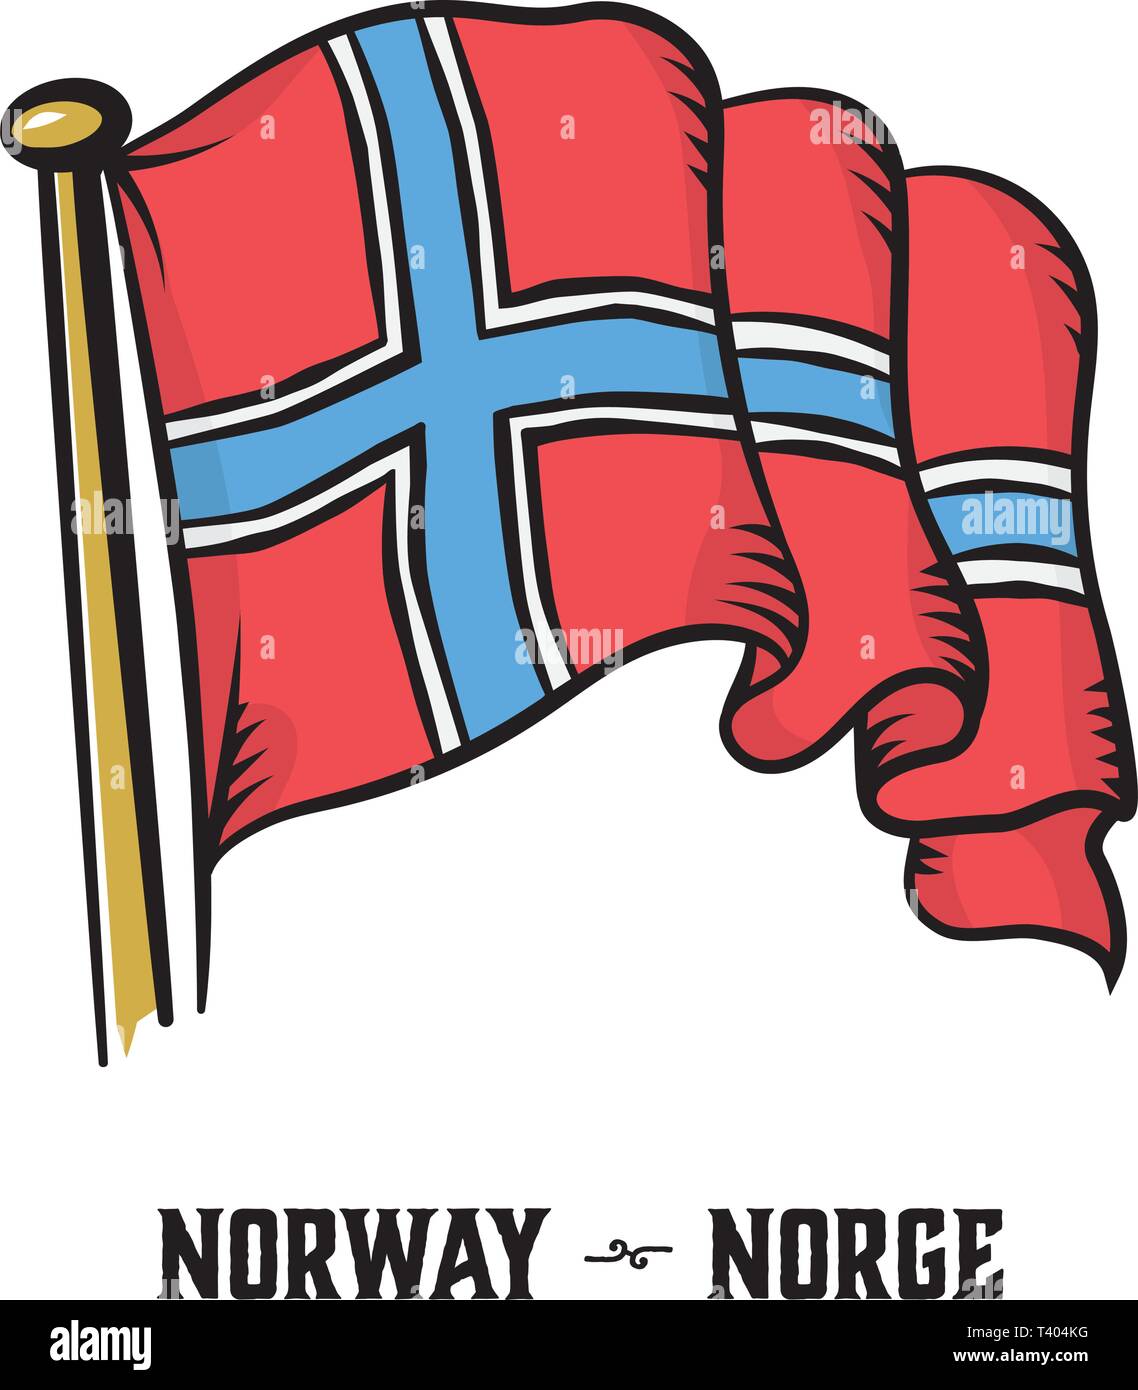 Vintage engraving style Norway flag vector illustration Stock Vector